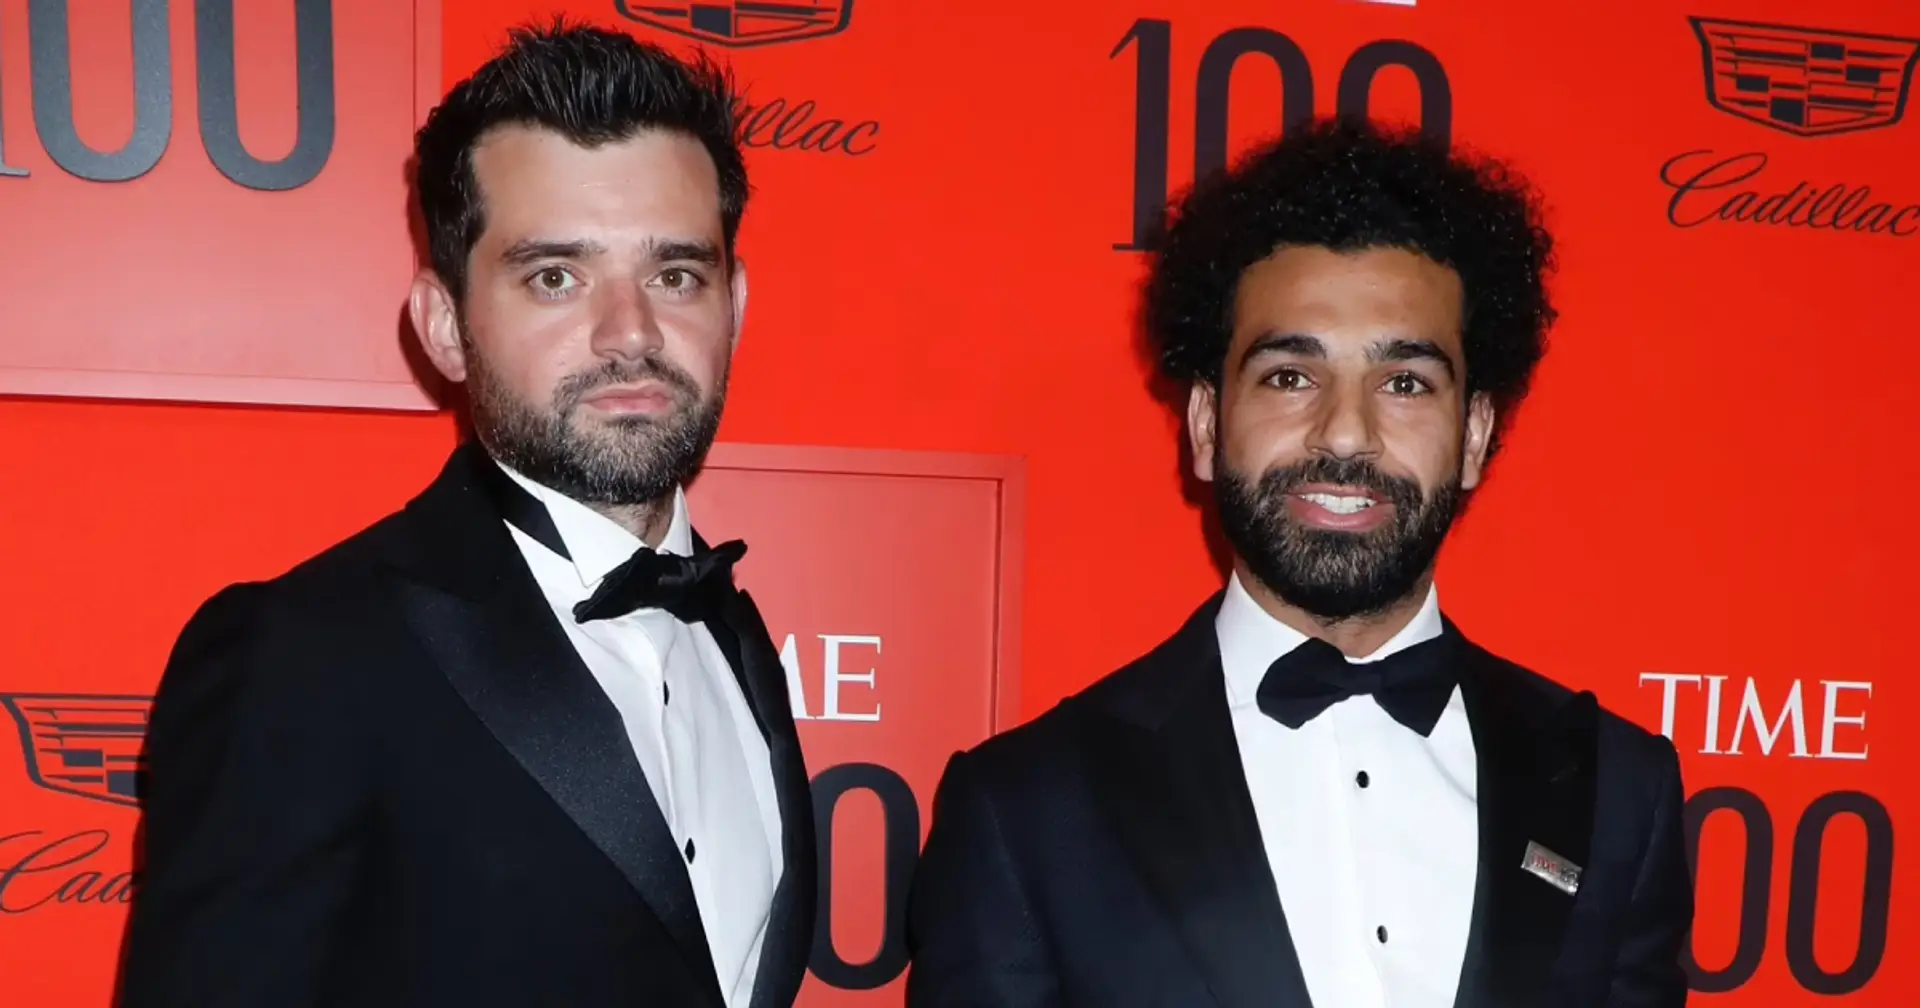 'I took names': agent rips into Mo Salah critics over Liverpool return from Egypt